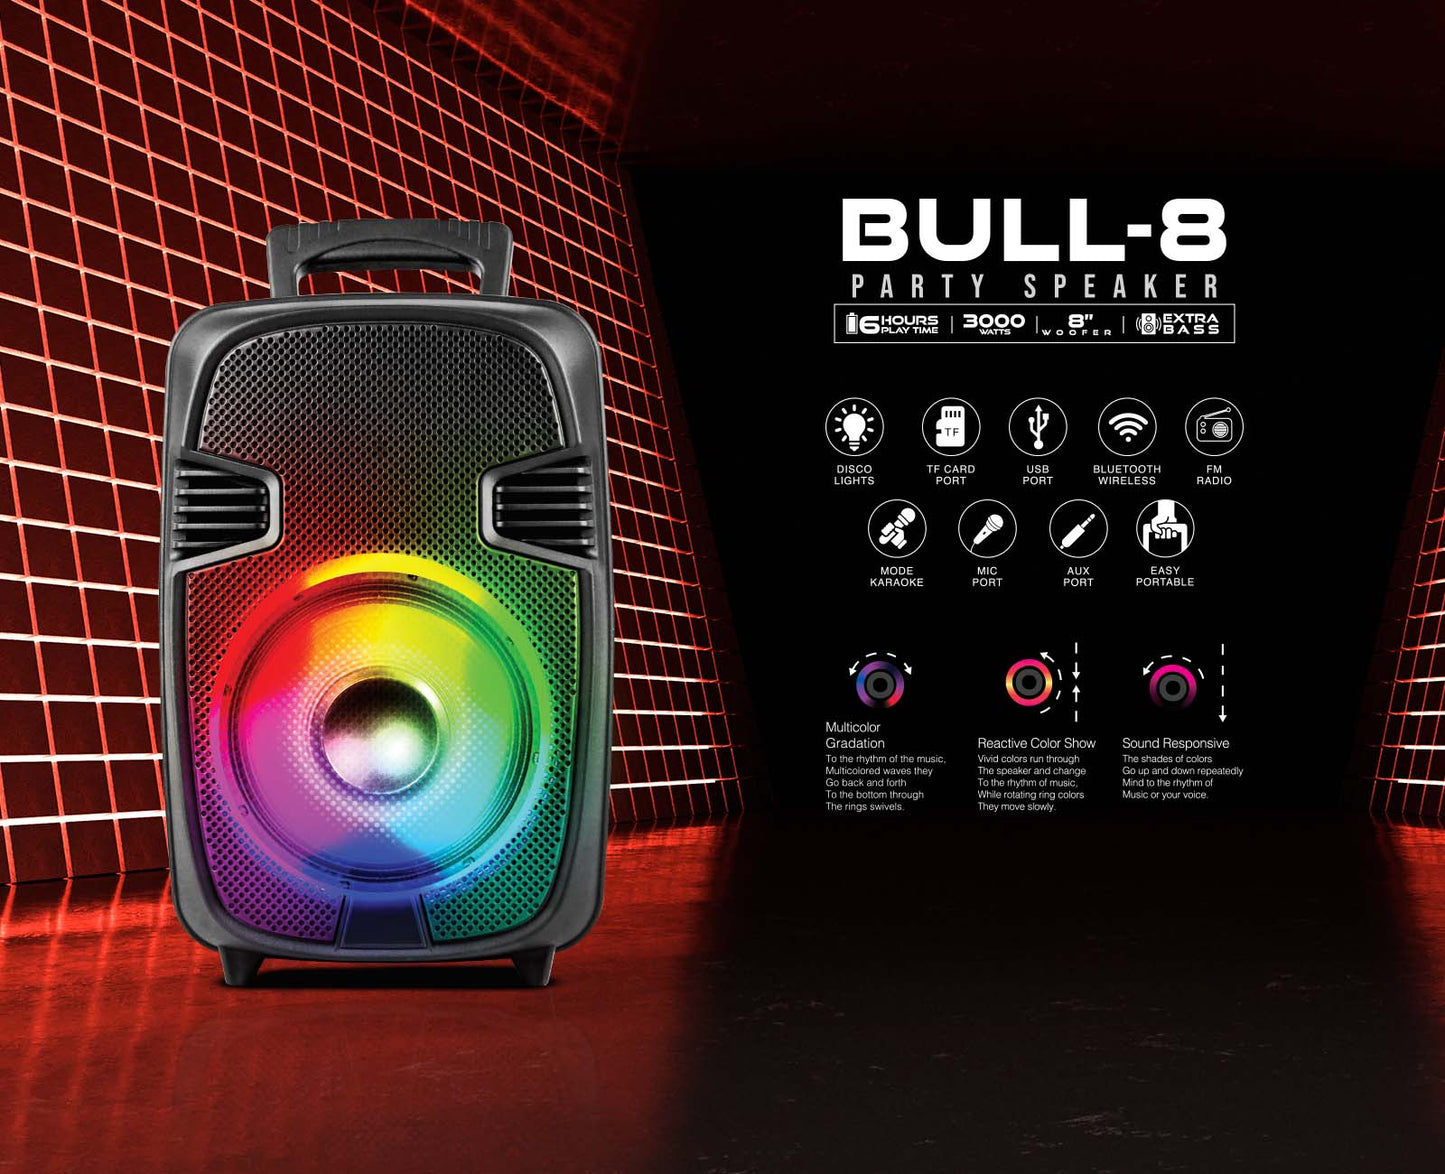 TOPTECH BULL-8, 8 Inch Woofer Rechargeable Party Portable Speaker with Multi-color Disco Lights on Grill,10 meters (33ft)Bluetooth Distance,of Blazing Powerful Sound, Handle and Wheels and Wireless Microphone for Party/Gift/Indooer/Outdoor